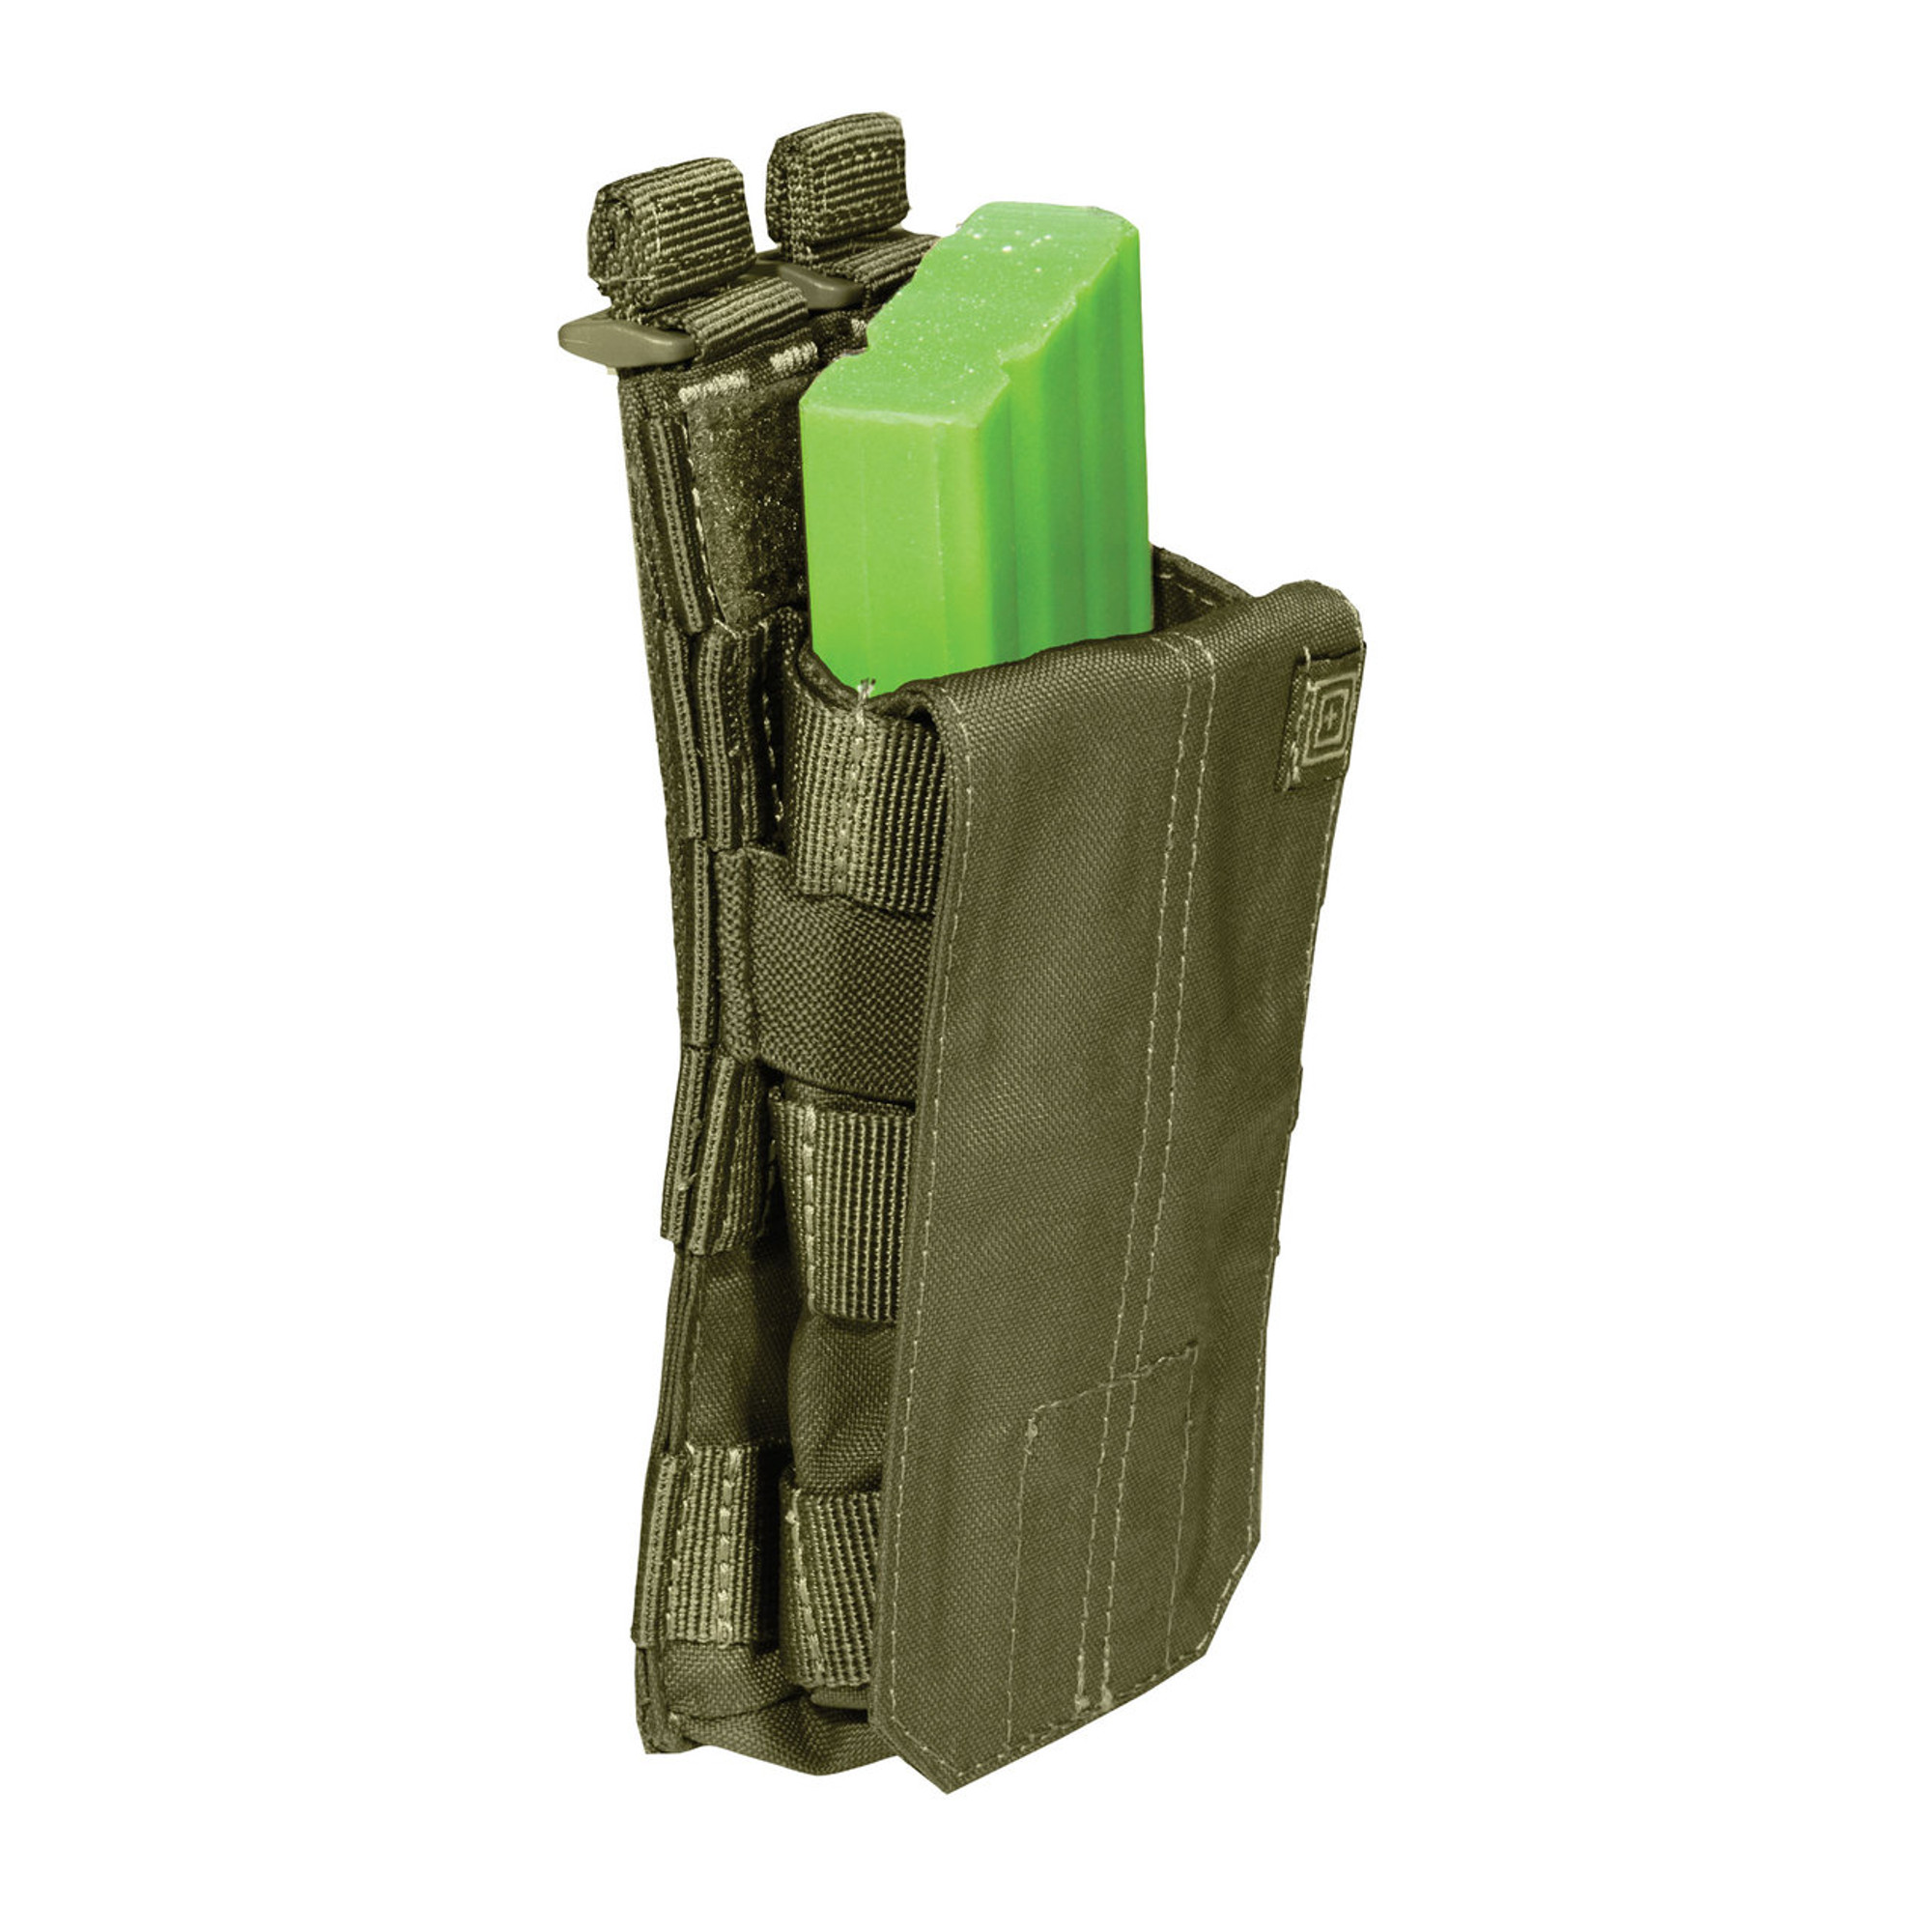 5.11 AR /G36 Single Bungee Cover Pouch - Tac OD